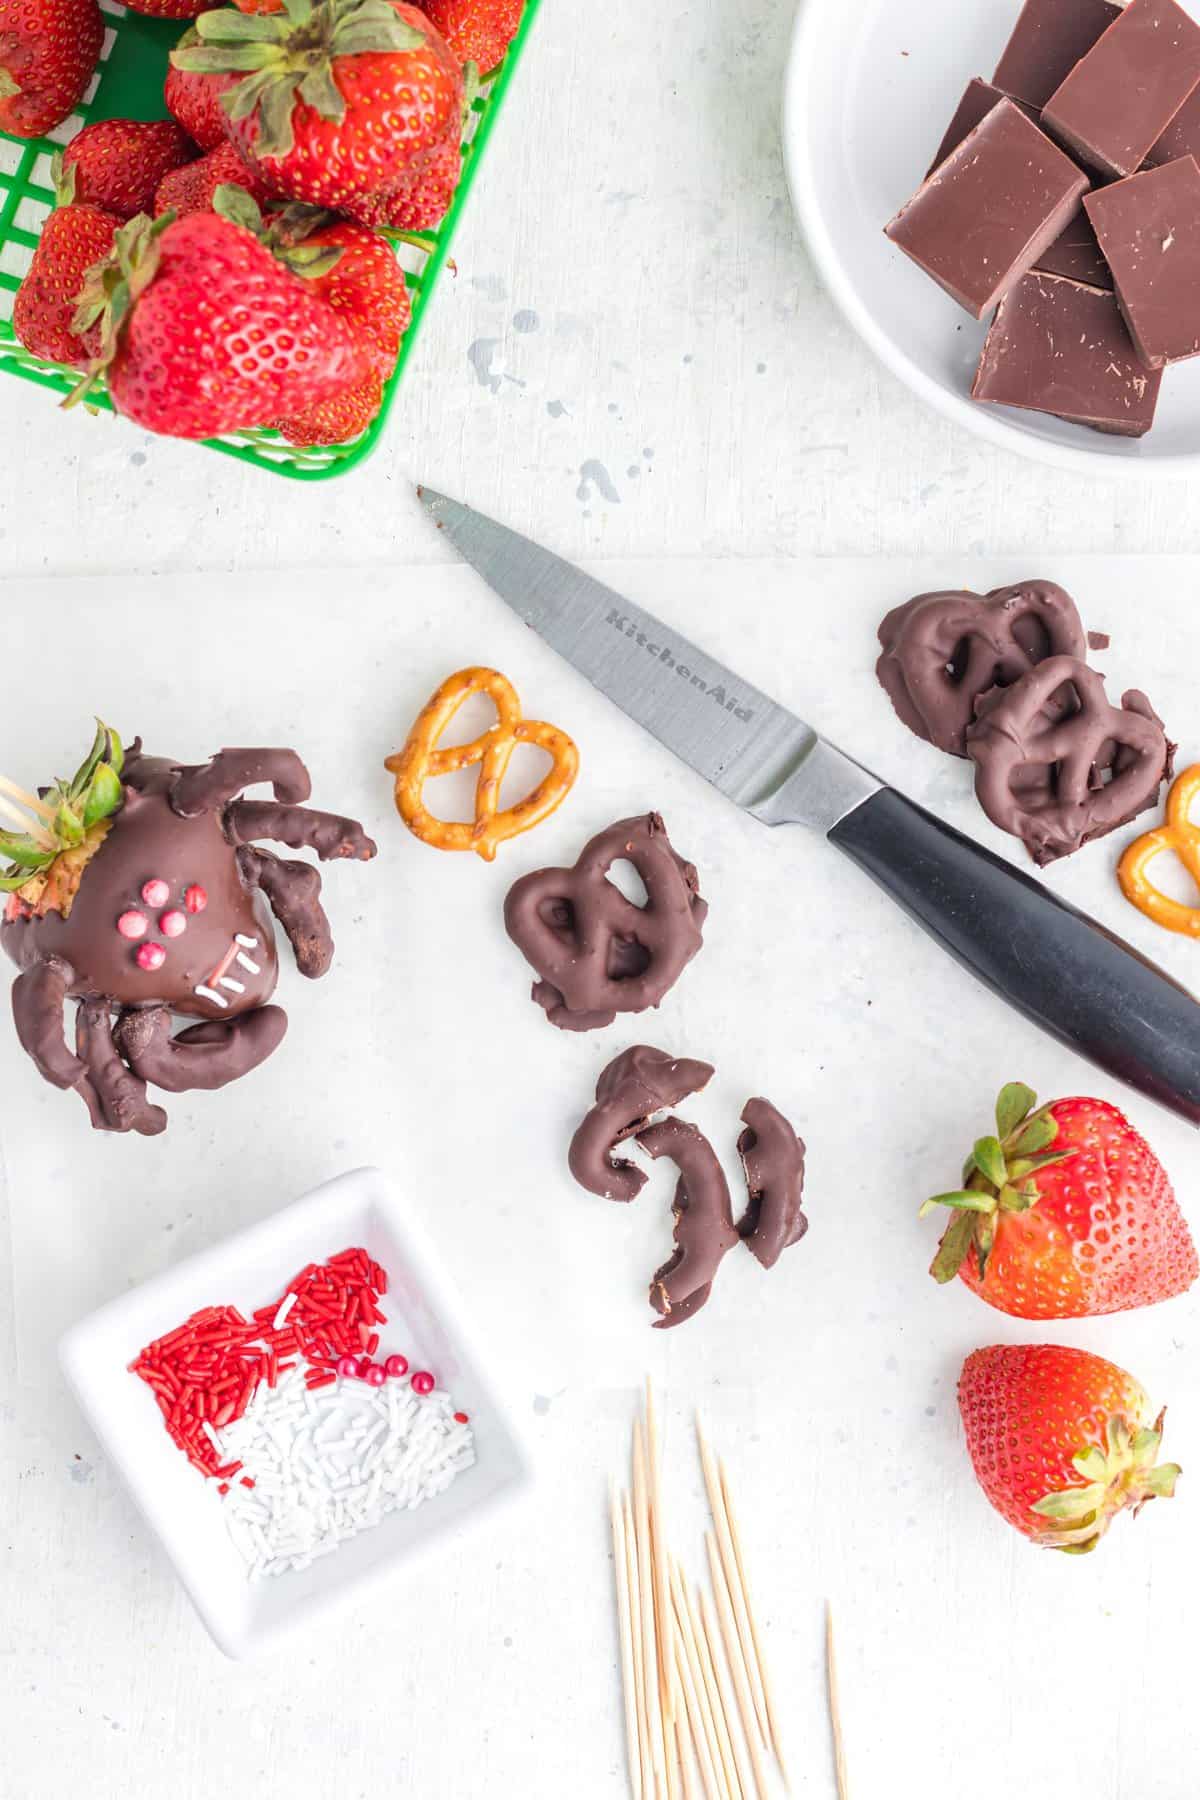 Cutting the chocolate dipped pretzel into little pieces for the legs. 